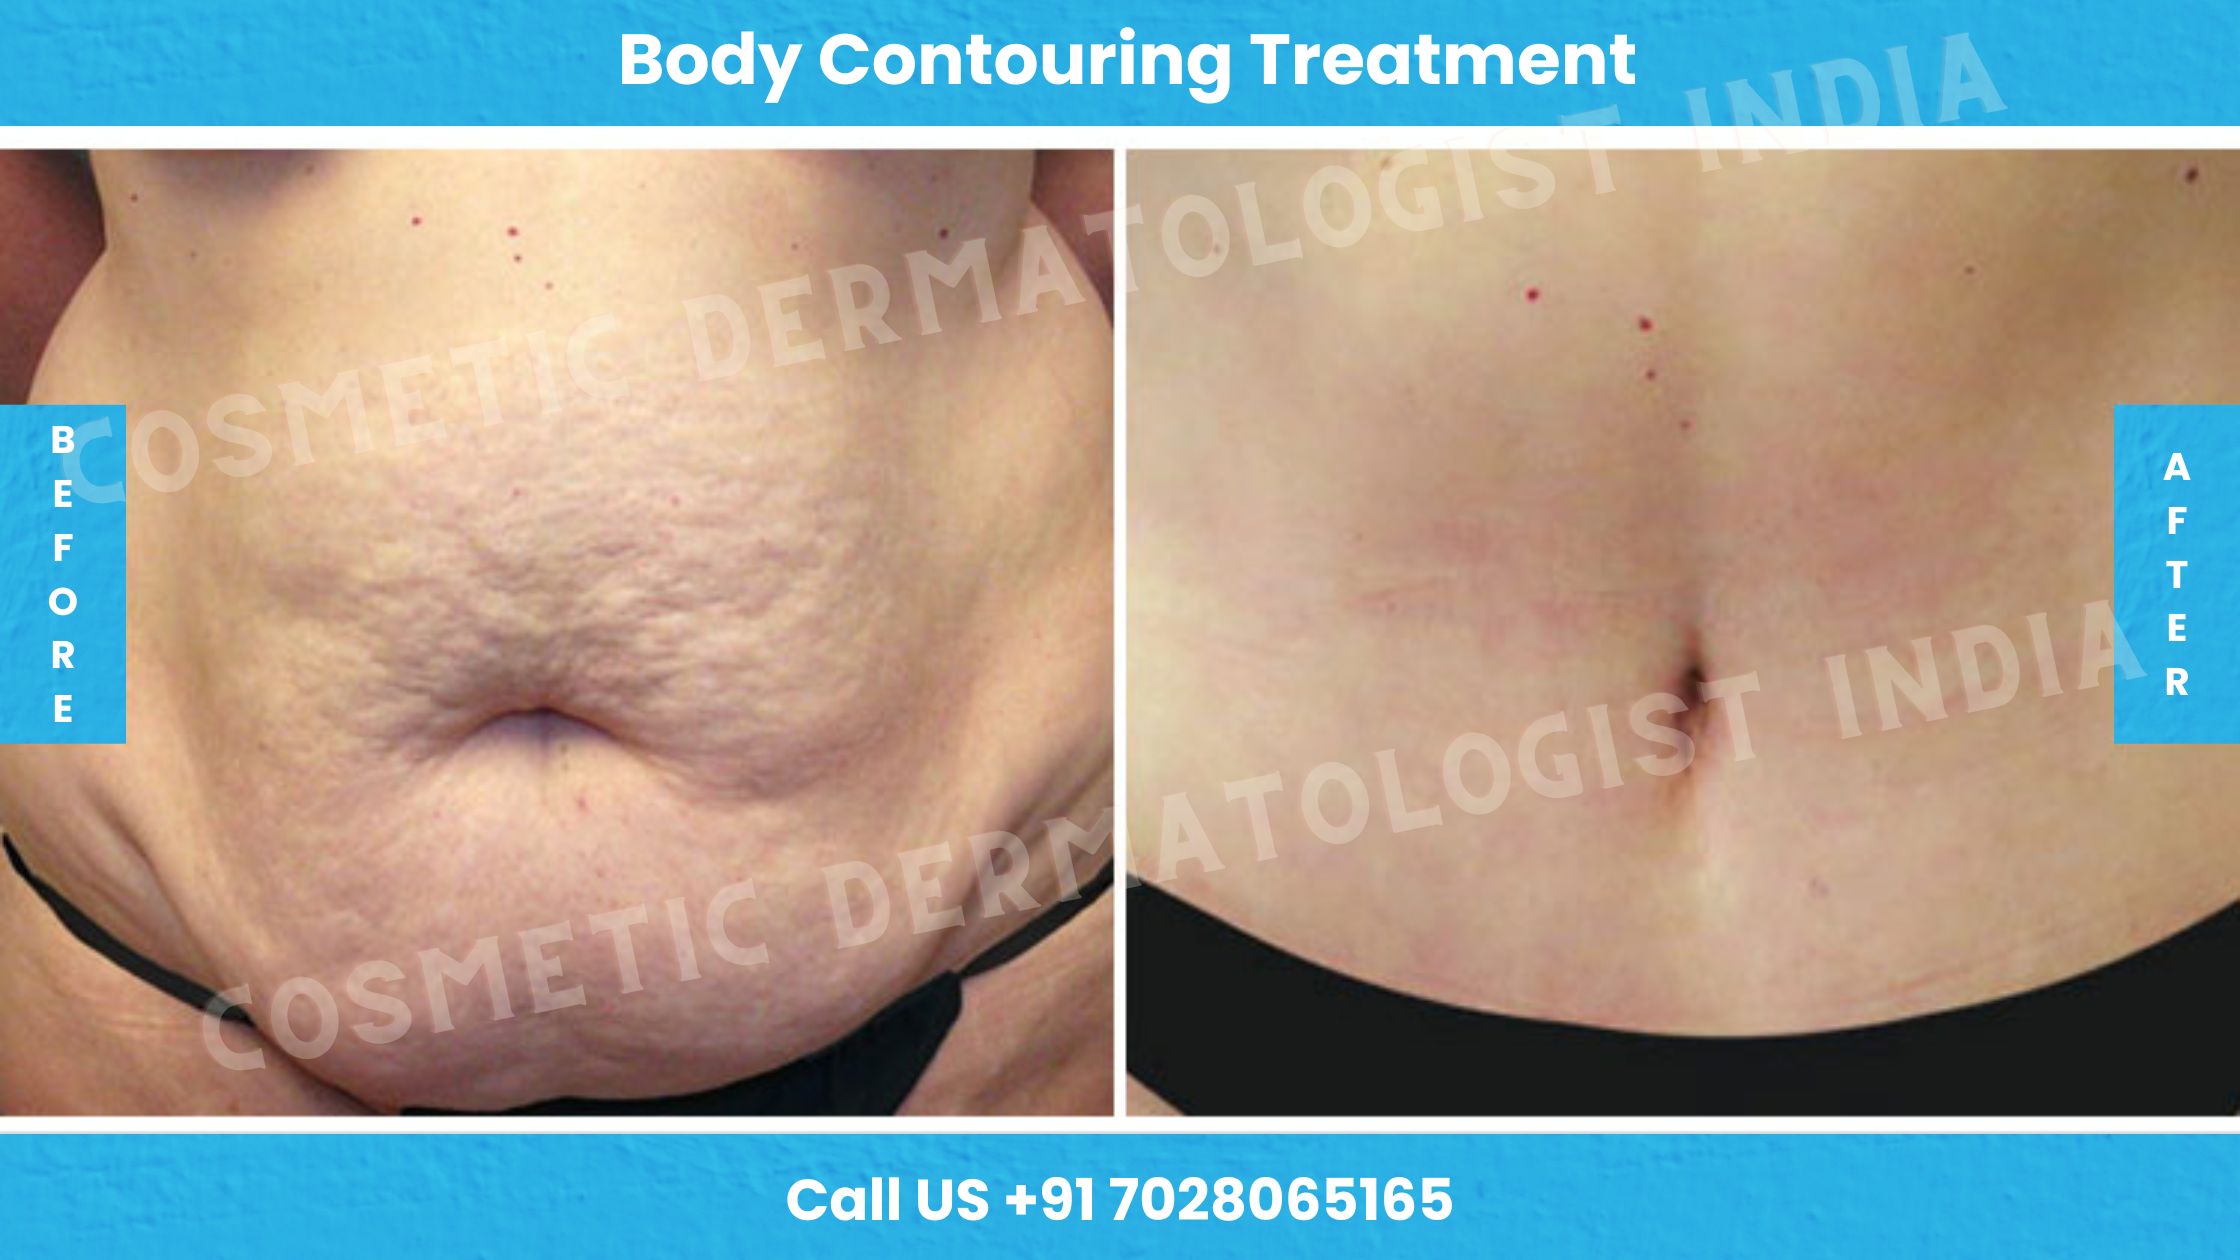 https://www.cosmeticdermatologistindia.com/wp-content/uploads/2023/03/Body-Contouring-Treatment-before-and-after.jpg